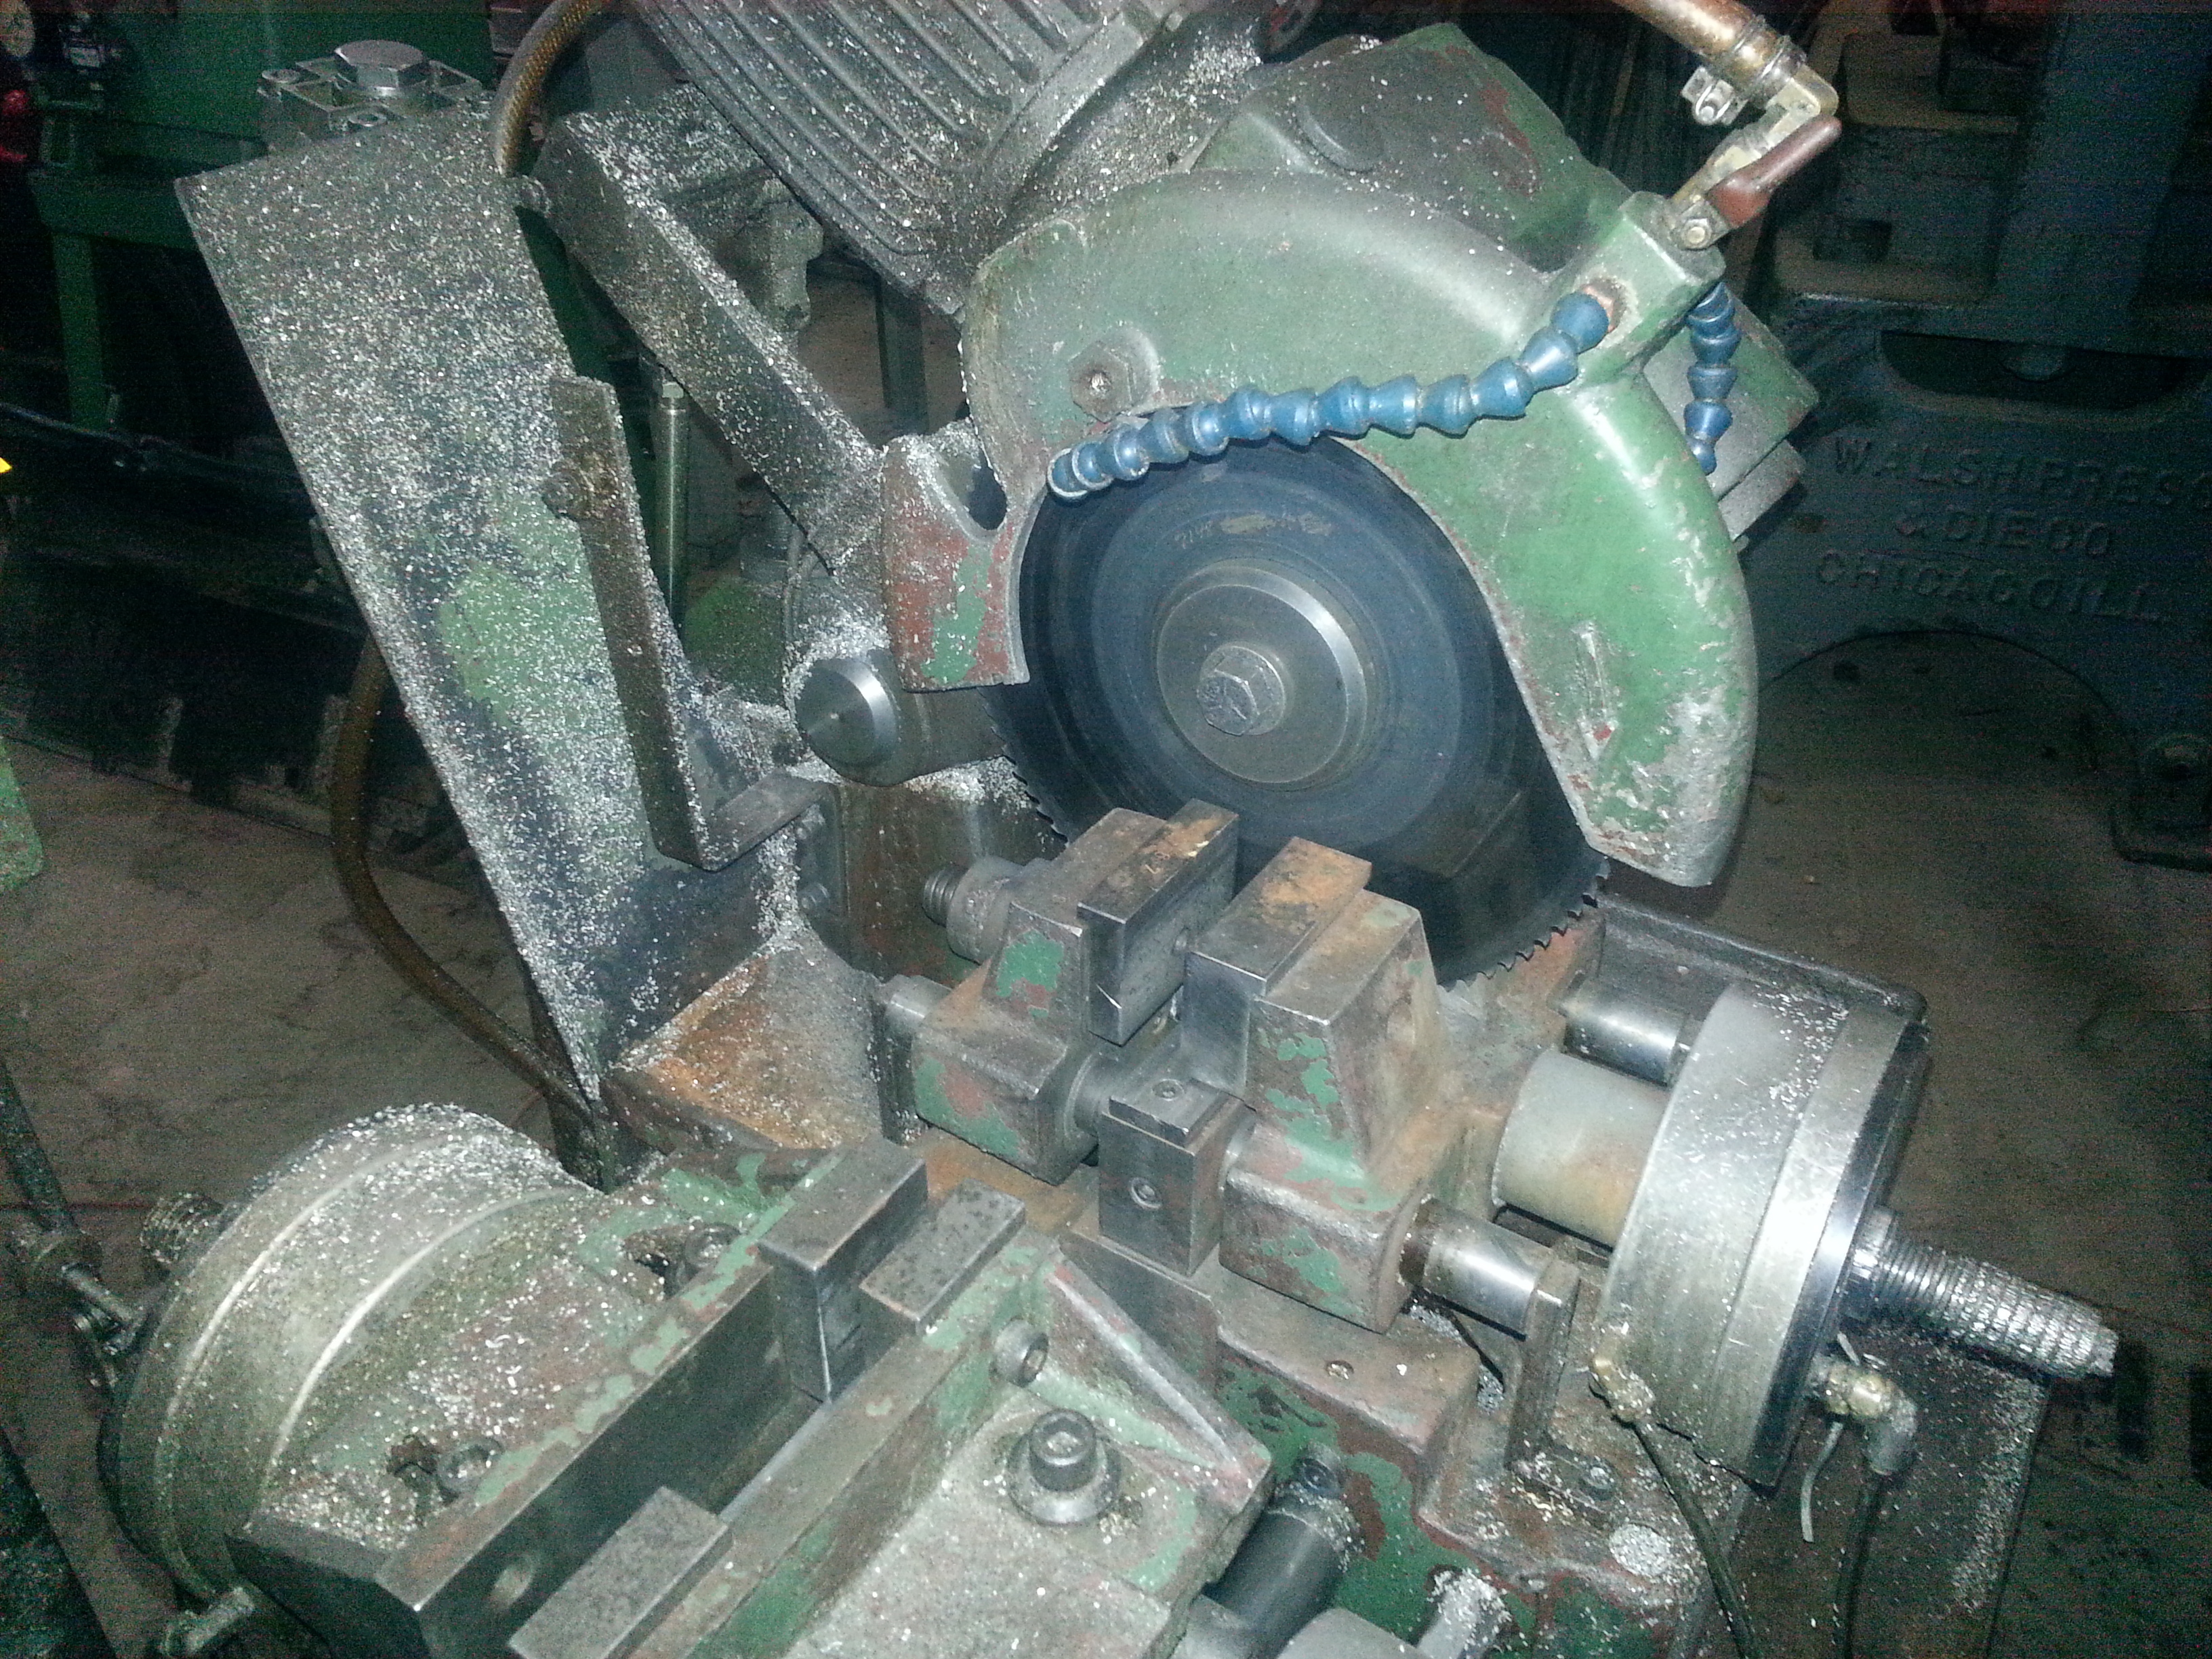 Fong Ho Circular Cold Saw For Sale